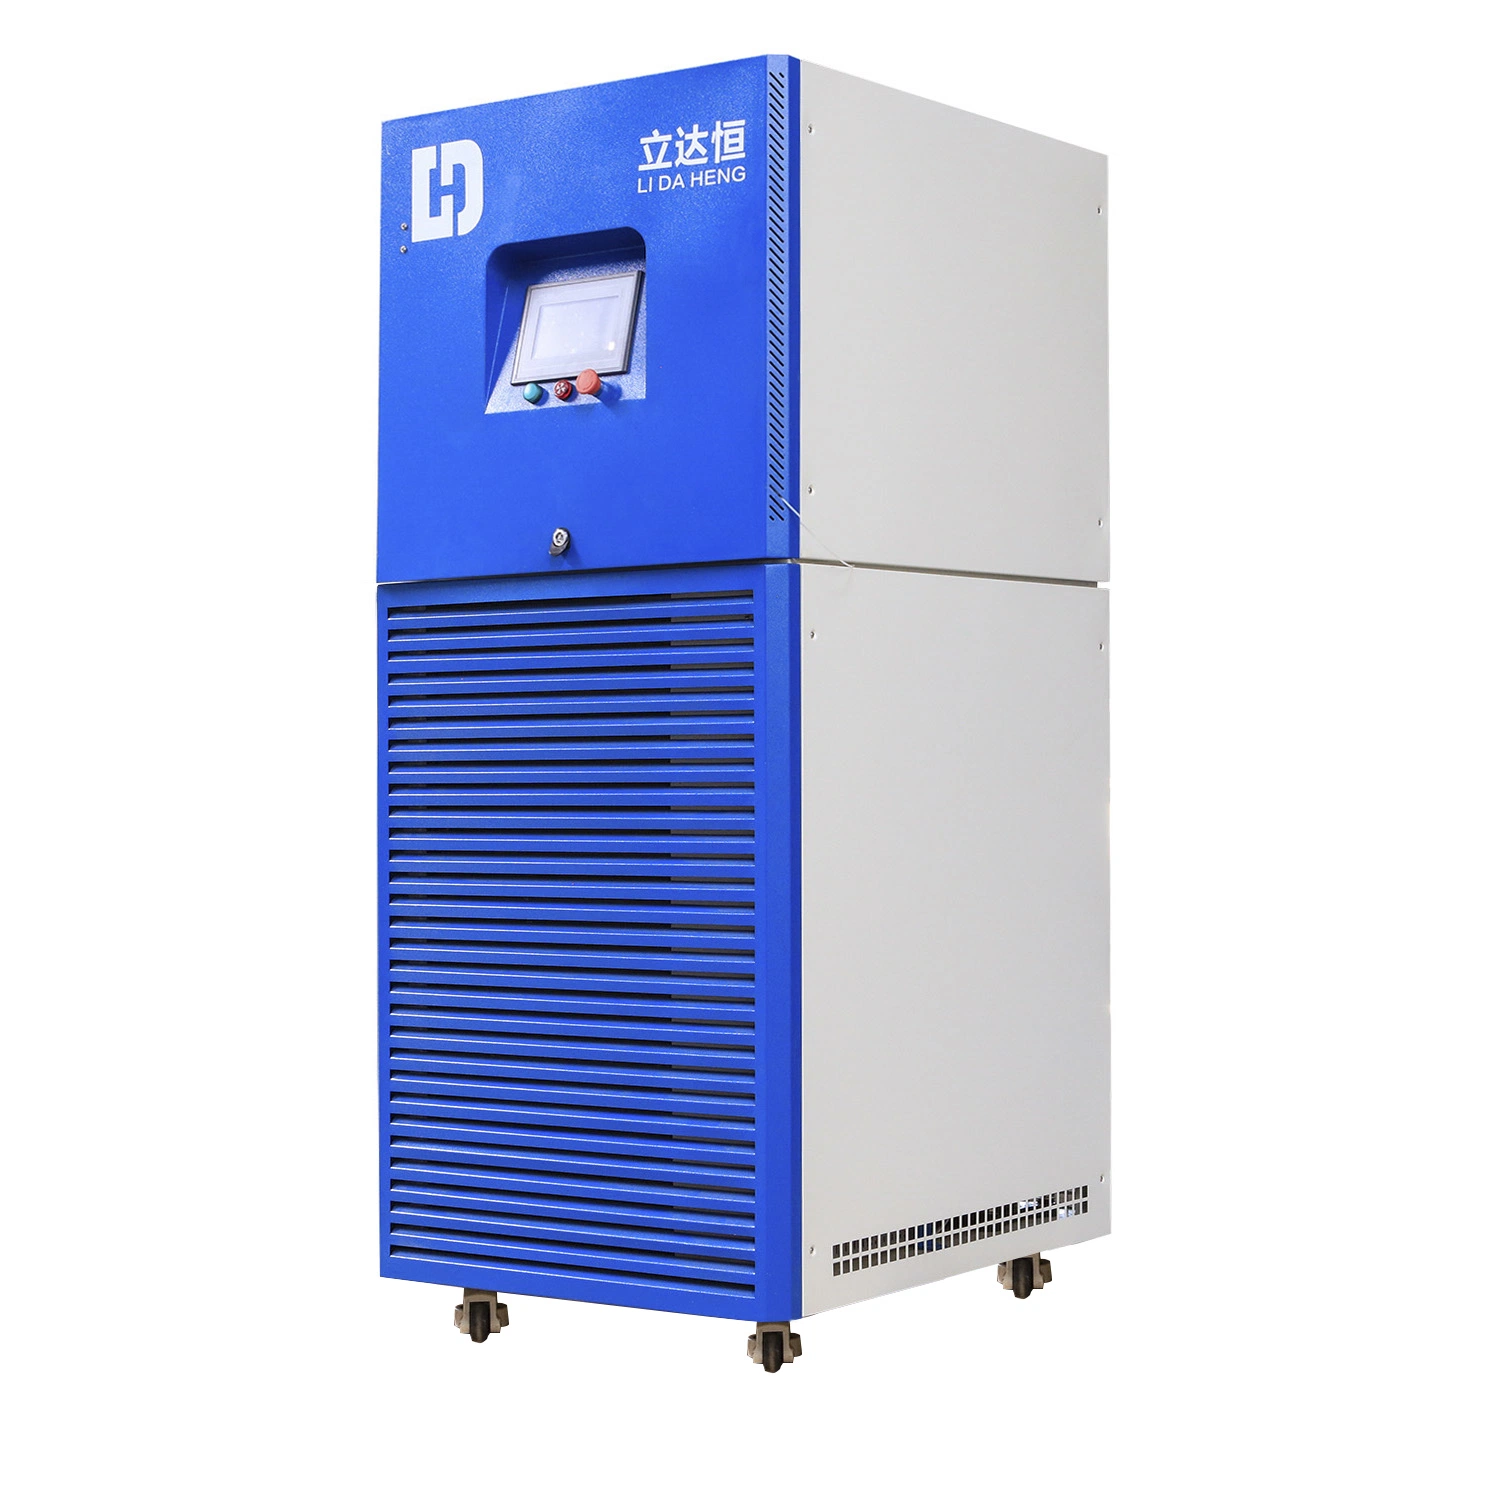 Liquid Nitrogen Generator 40L/Hr Small in Size and Light in Weight